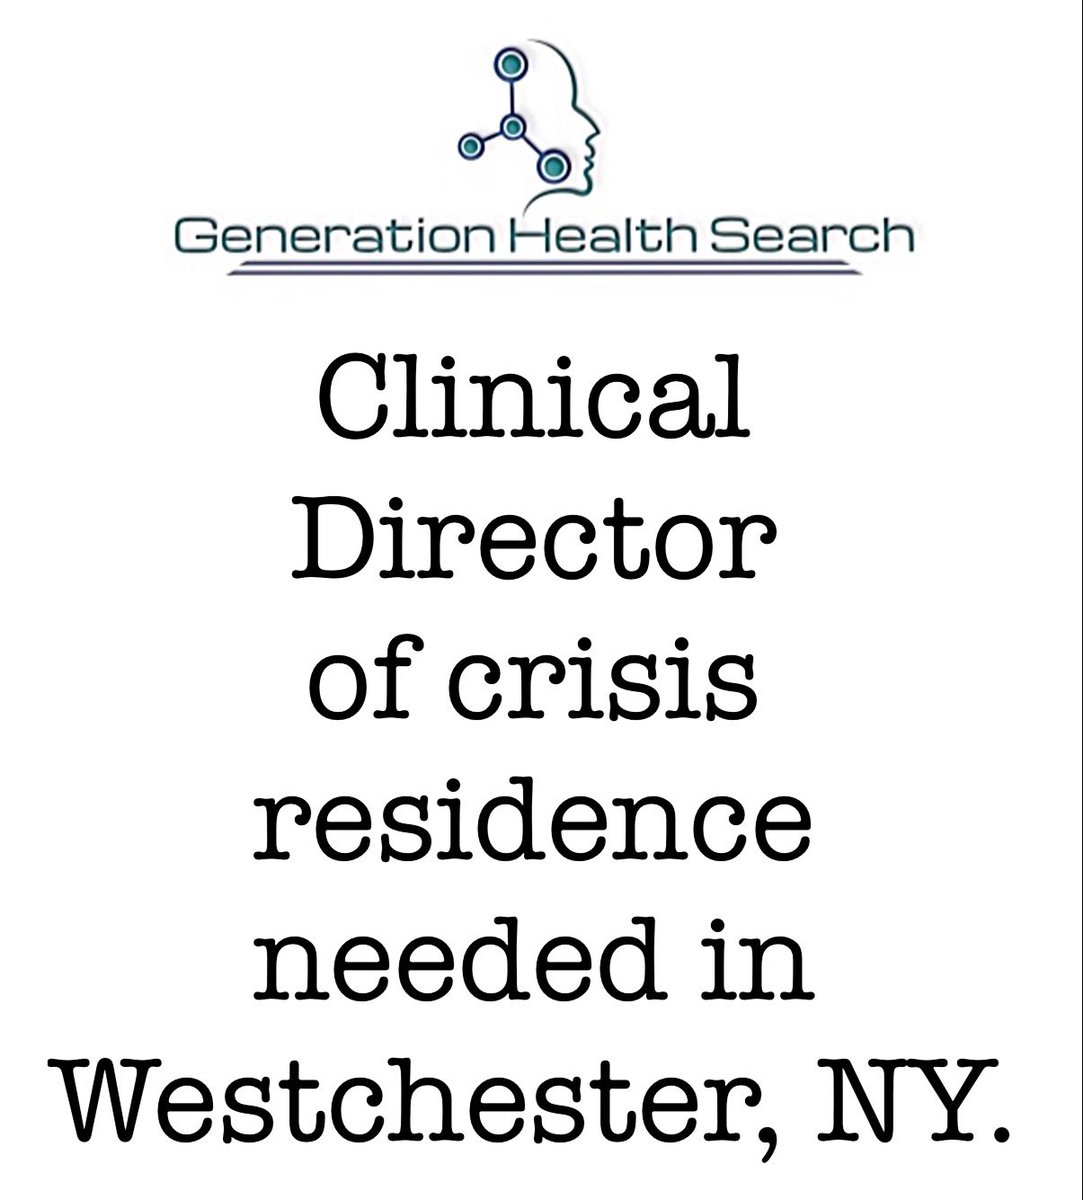 #Generationhealthsearch
#healthcare #healthcareworkers #physician #physicians #recruitment #psychiatry #medicalschool #medicaljobs #doctors #physicianrecruitment #readytowork #NYC #socialworker #mentalhealth #therapist #therapy #crisisresidence #director #clinicaldirector